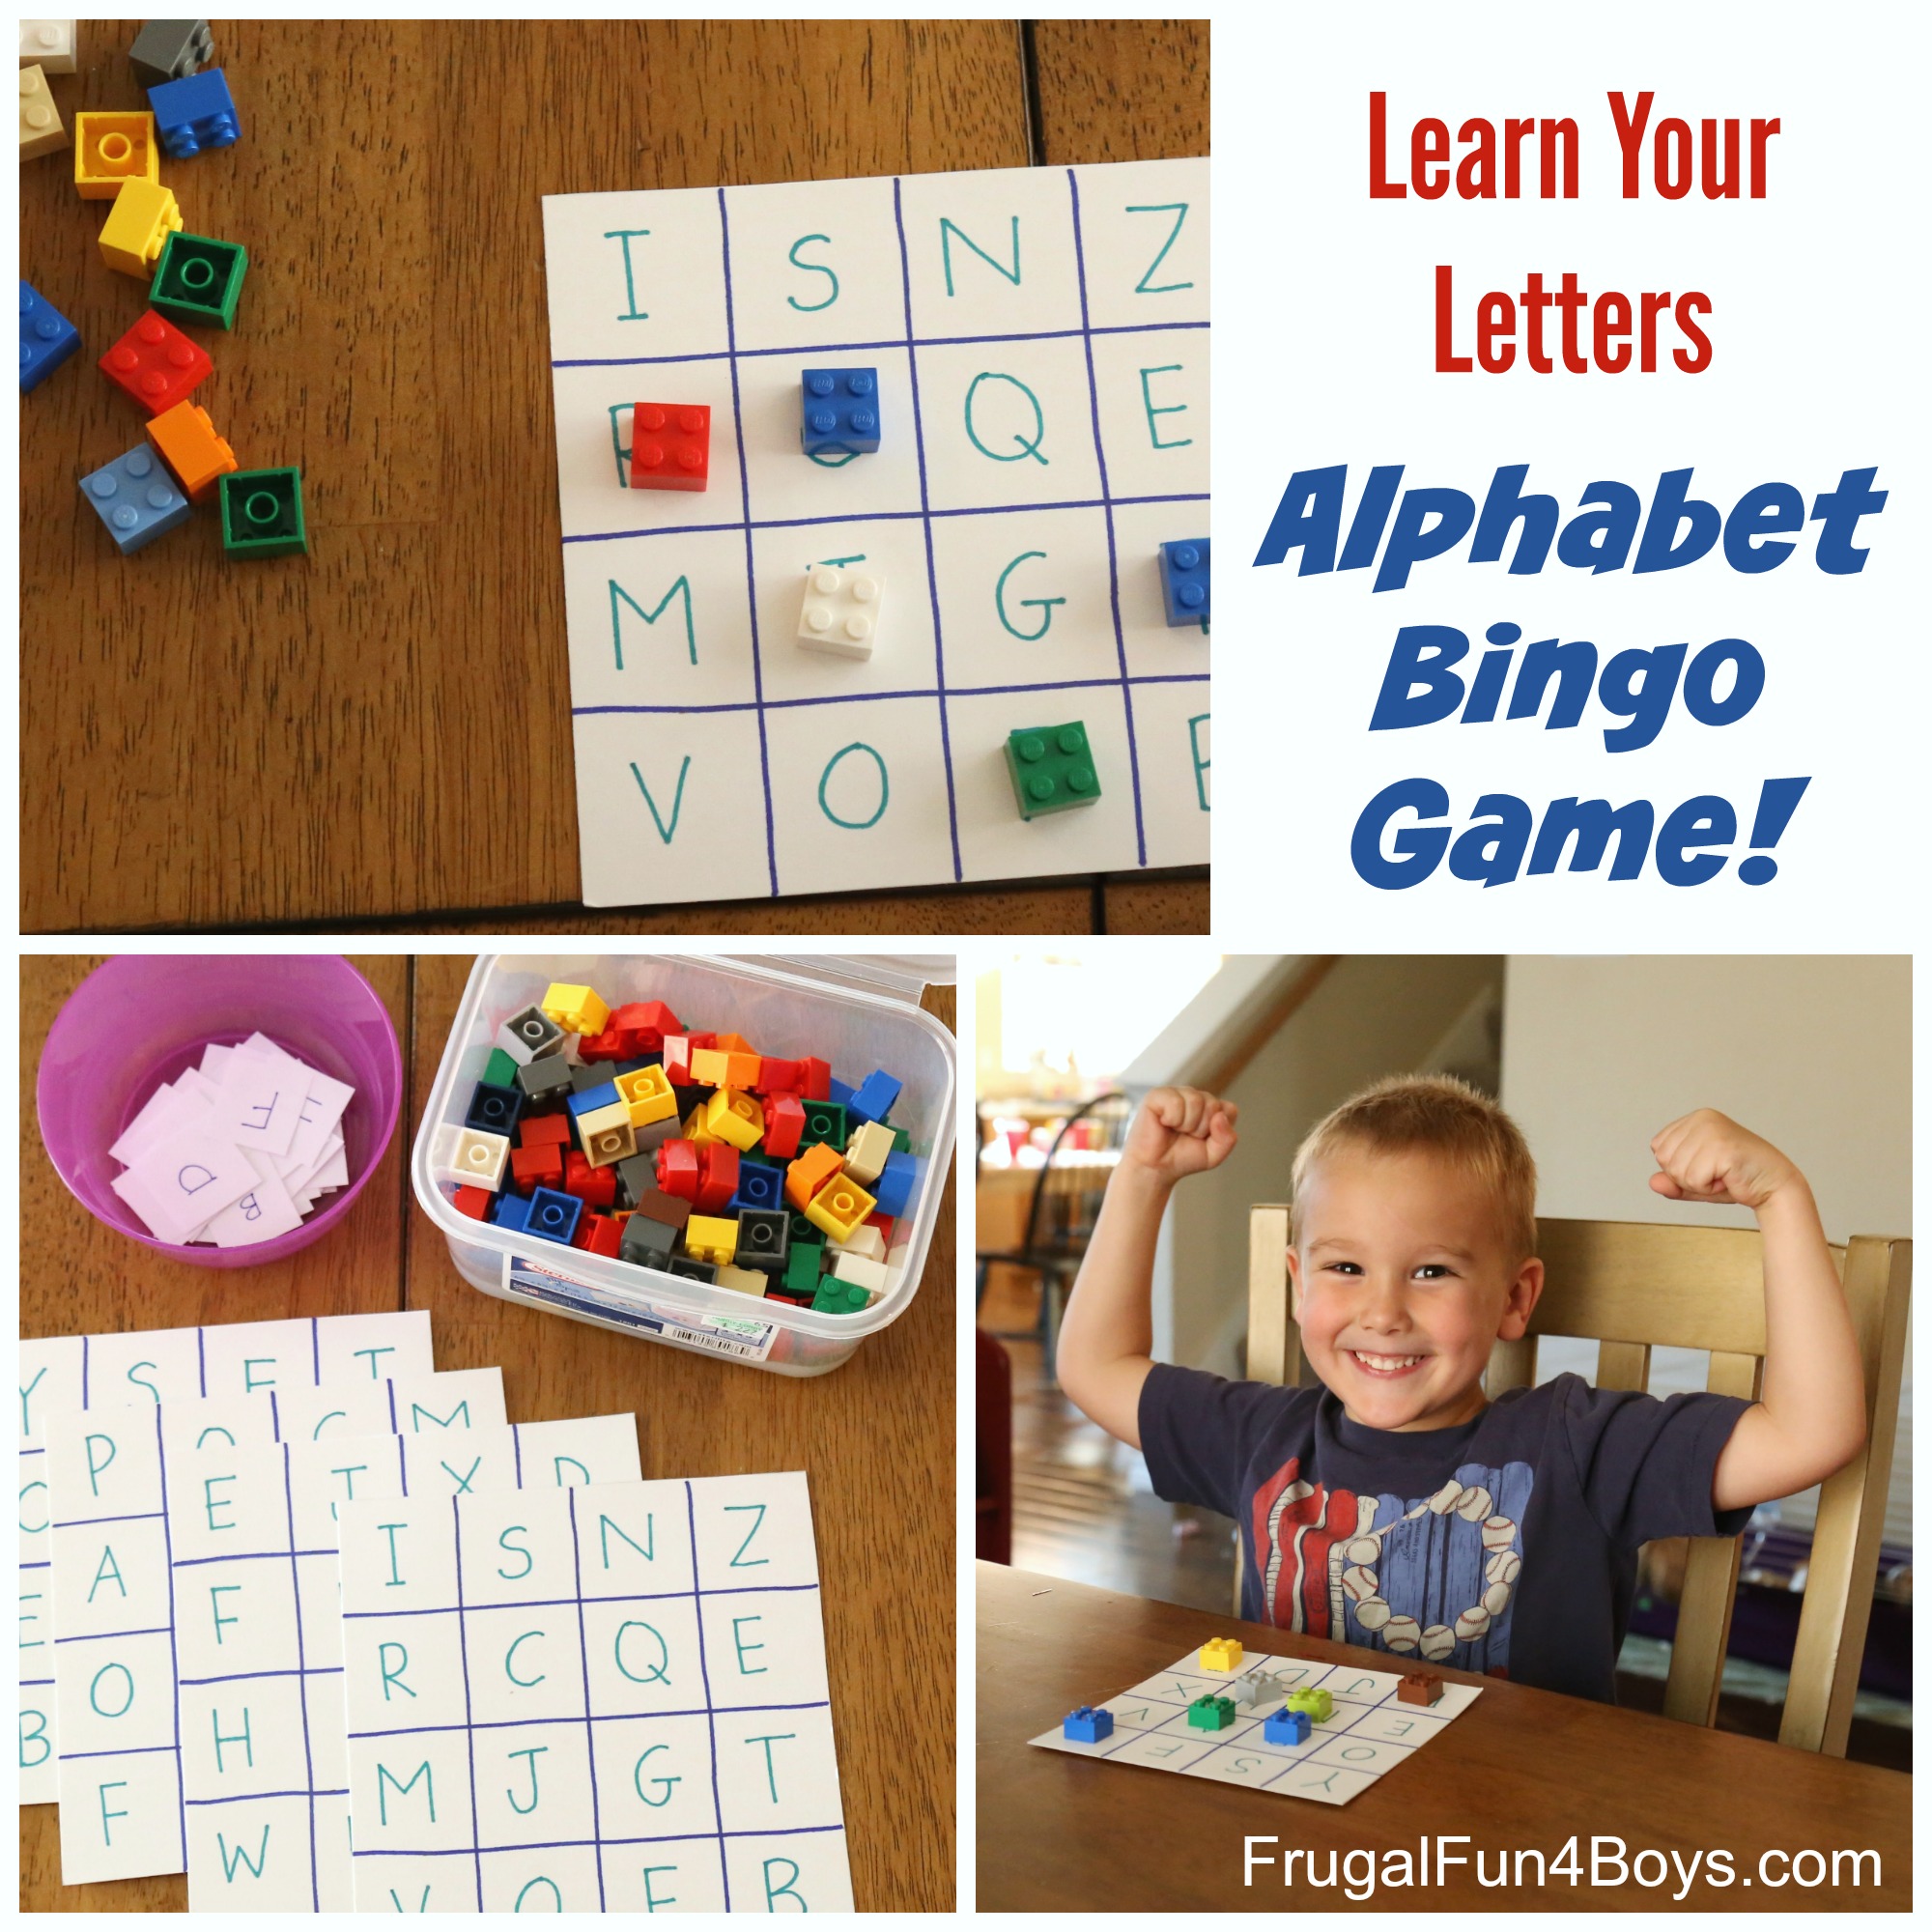 Learn Your Letters Alphabet Bingo Game